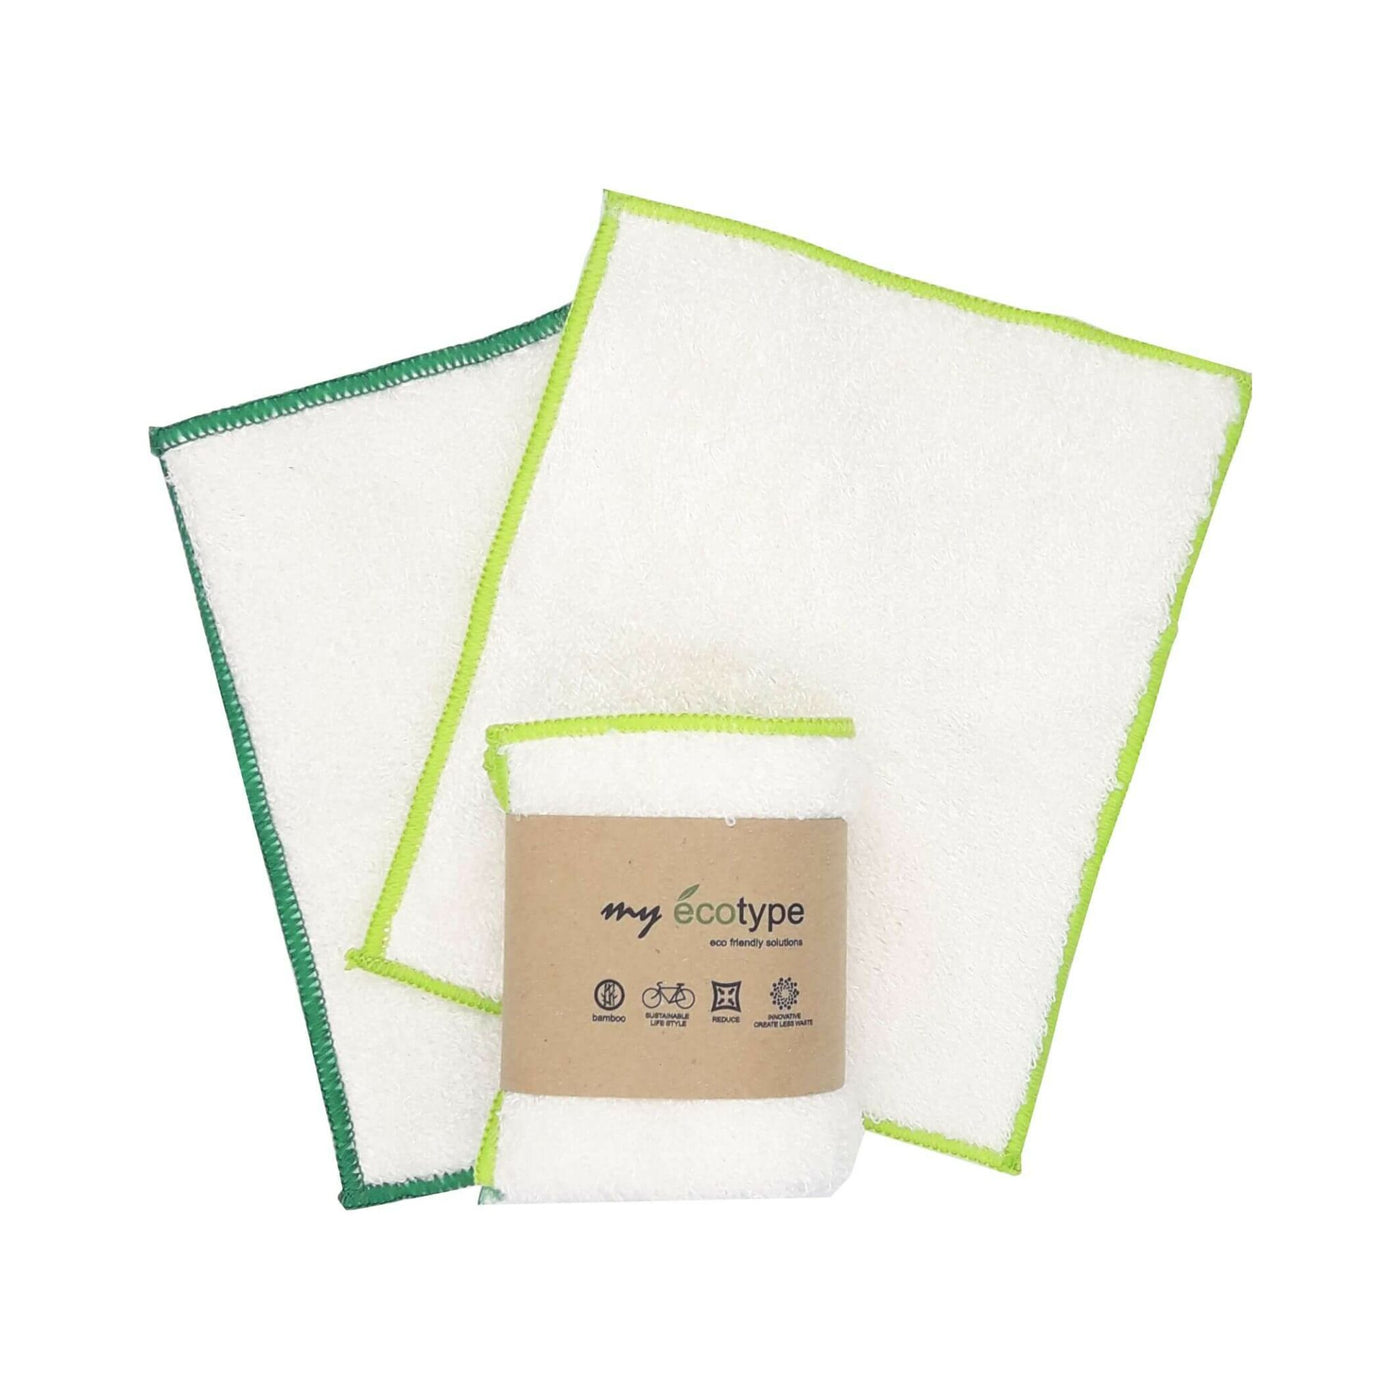 My Ecotype Cleaning Cloths -Set of 2 pieces